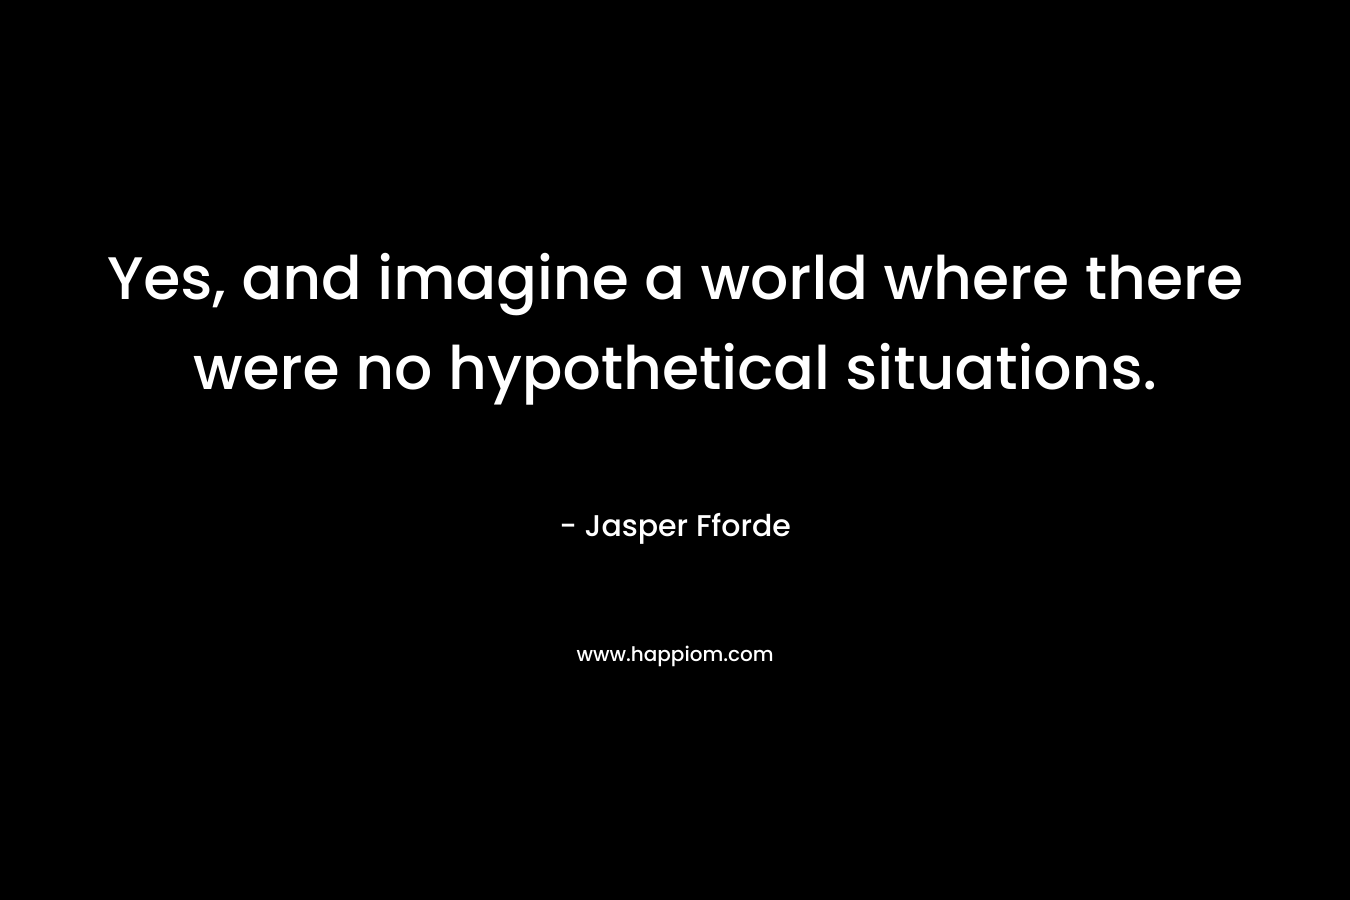 Yes, and imagine a world where there were no hypothetical situations.